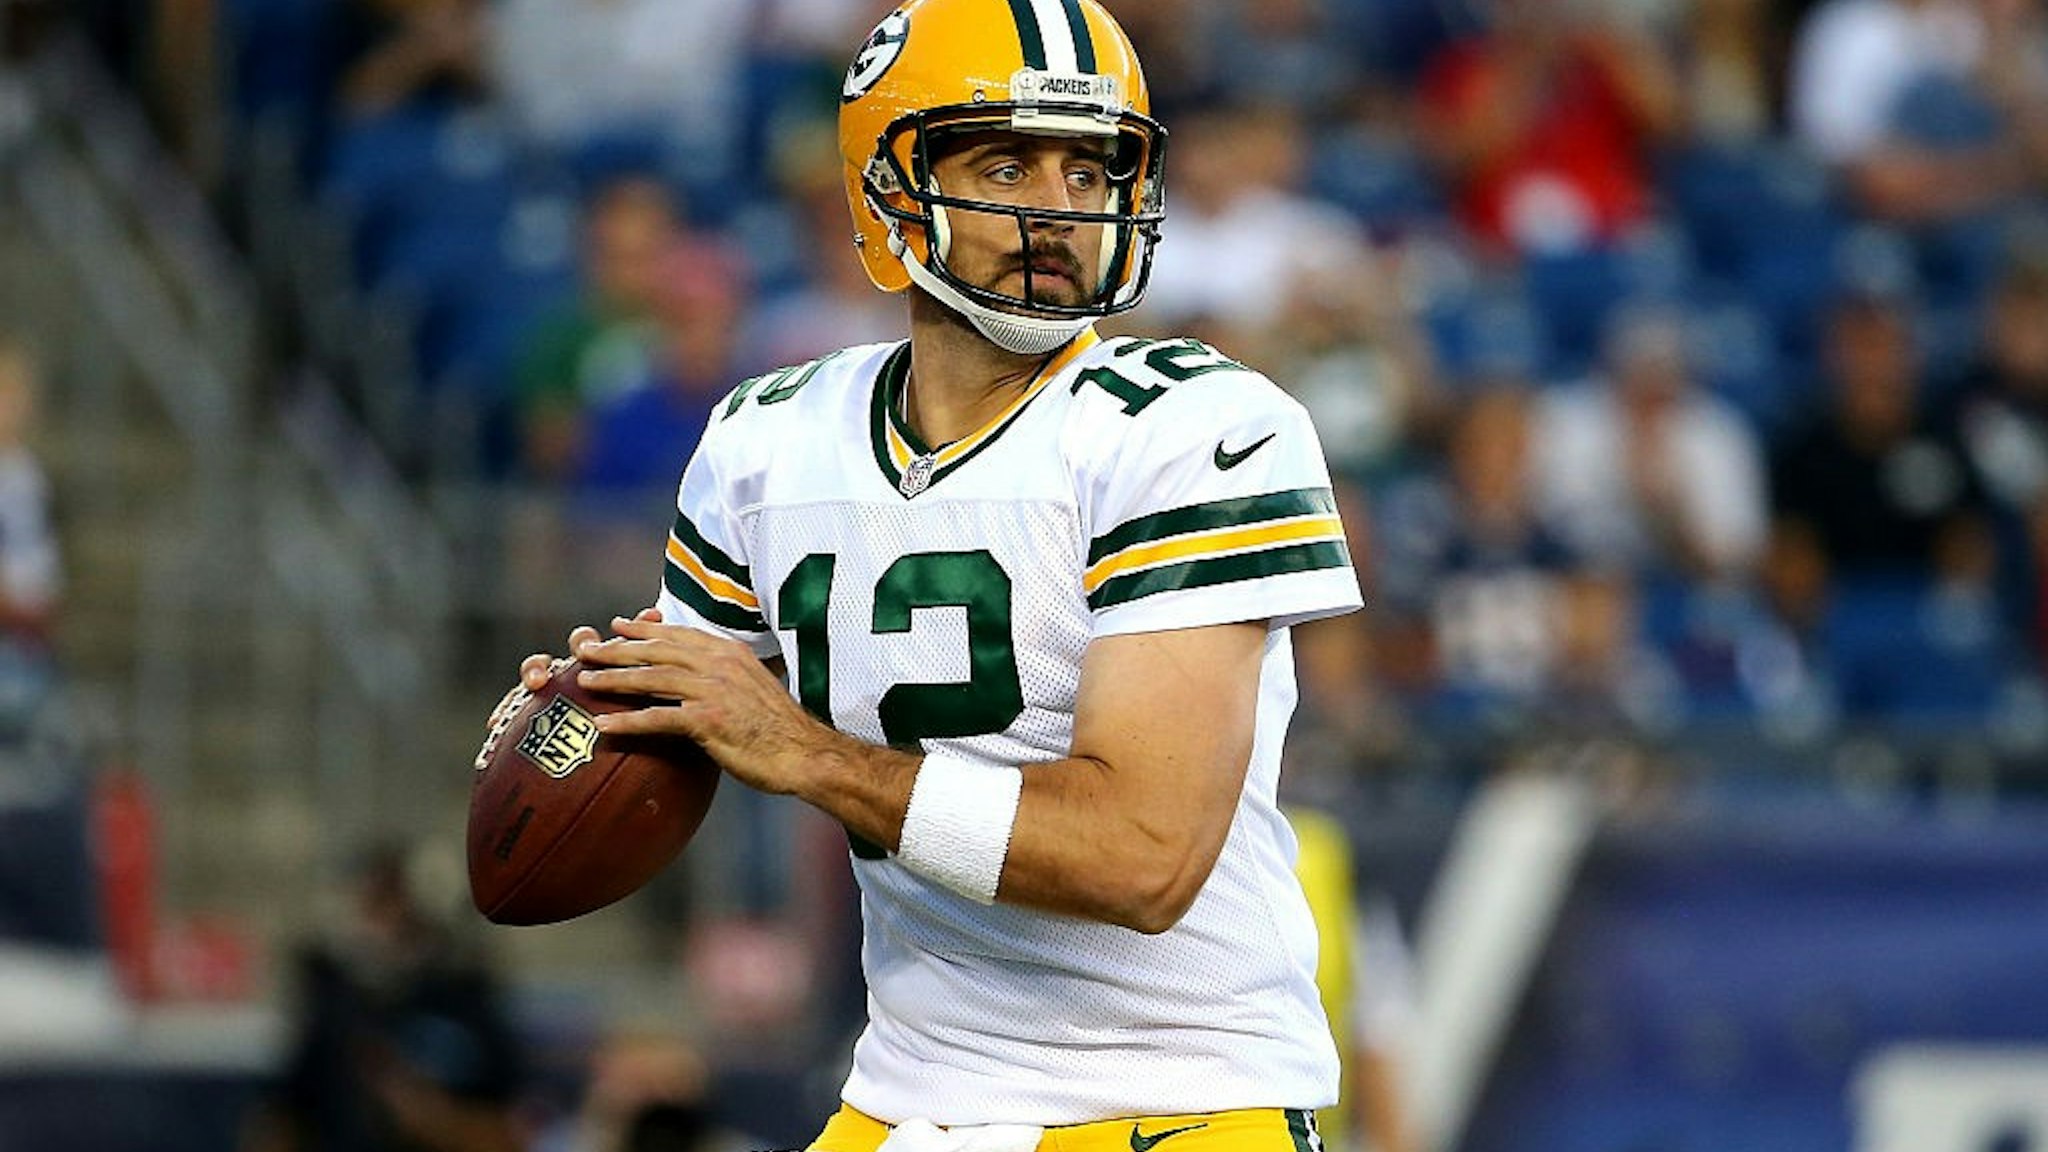 FOXBORO, MA - AUGUST 13: Aaron Rodgers #12 of the Green Bay Packers drops back to pass in the first quarter against the New England Patriots during a preseason game at Gillette Stadium on August 13, 2015 in Foxboro, Massachusetts. (Photo by